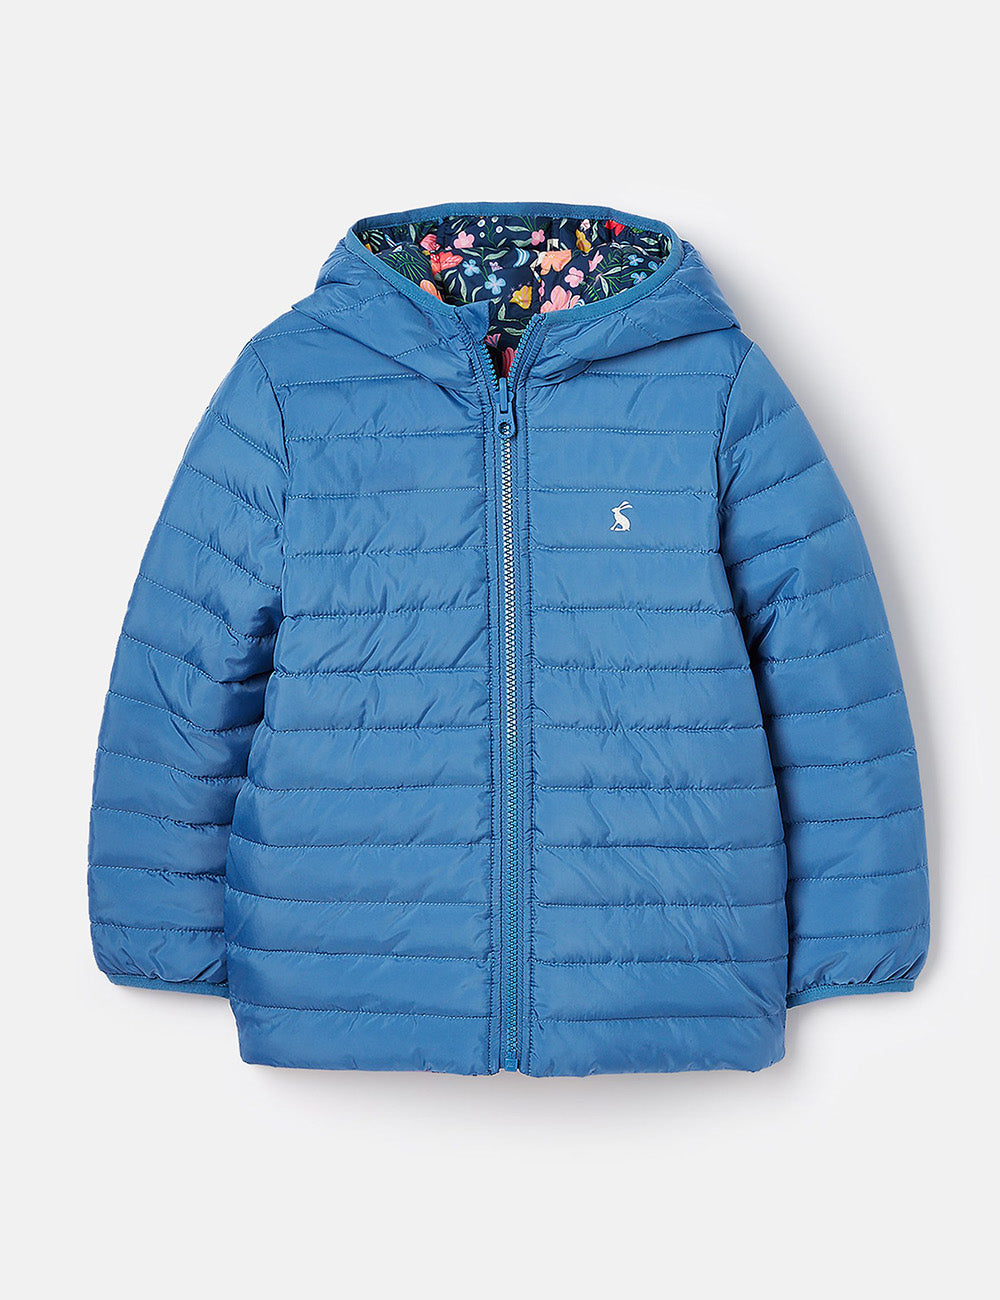 Joules Kaitlin Reversible Padded Coat - Navy Floral Horse